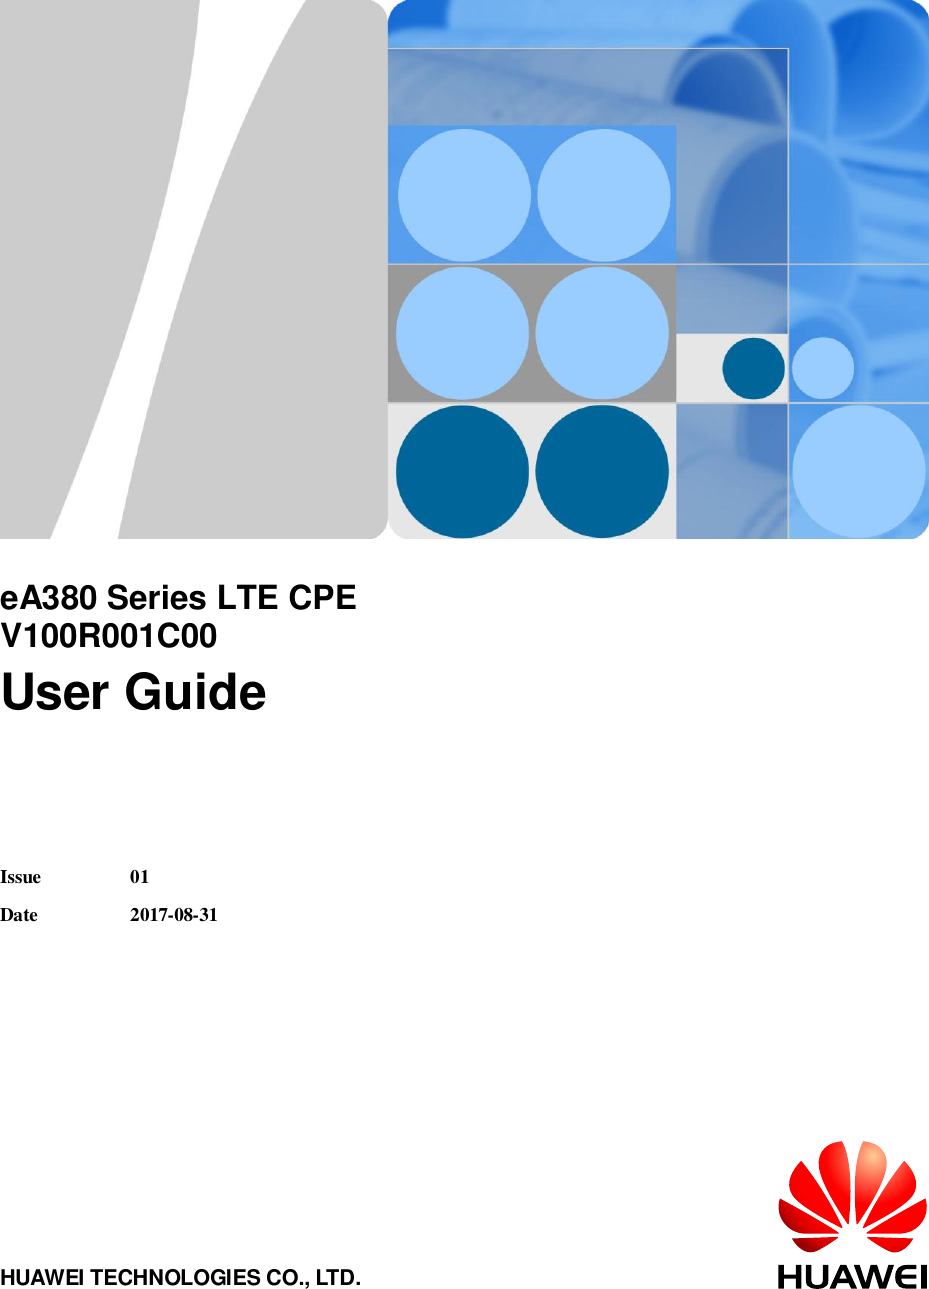        eA380 Series LTE CPE V100R001C00 User Guide   Issue  01 Date  2017-08-31 HUAWEI TECHNOLOGIES CO., LTD. 